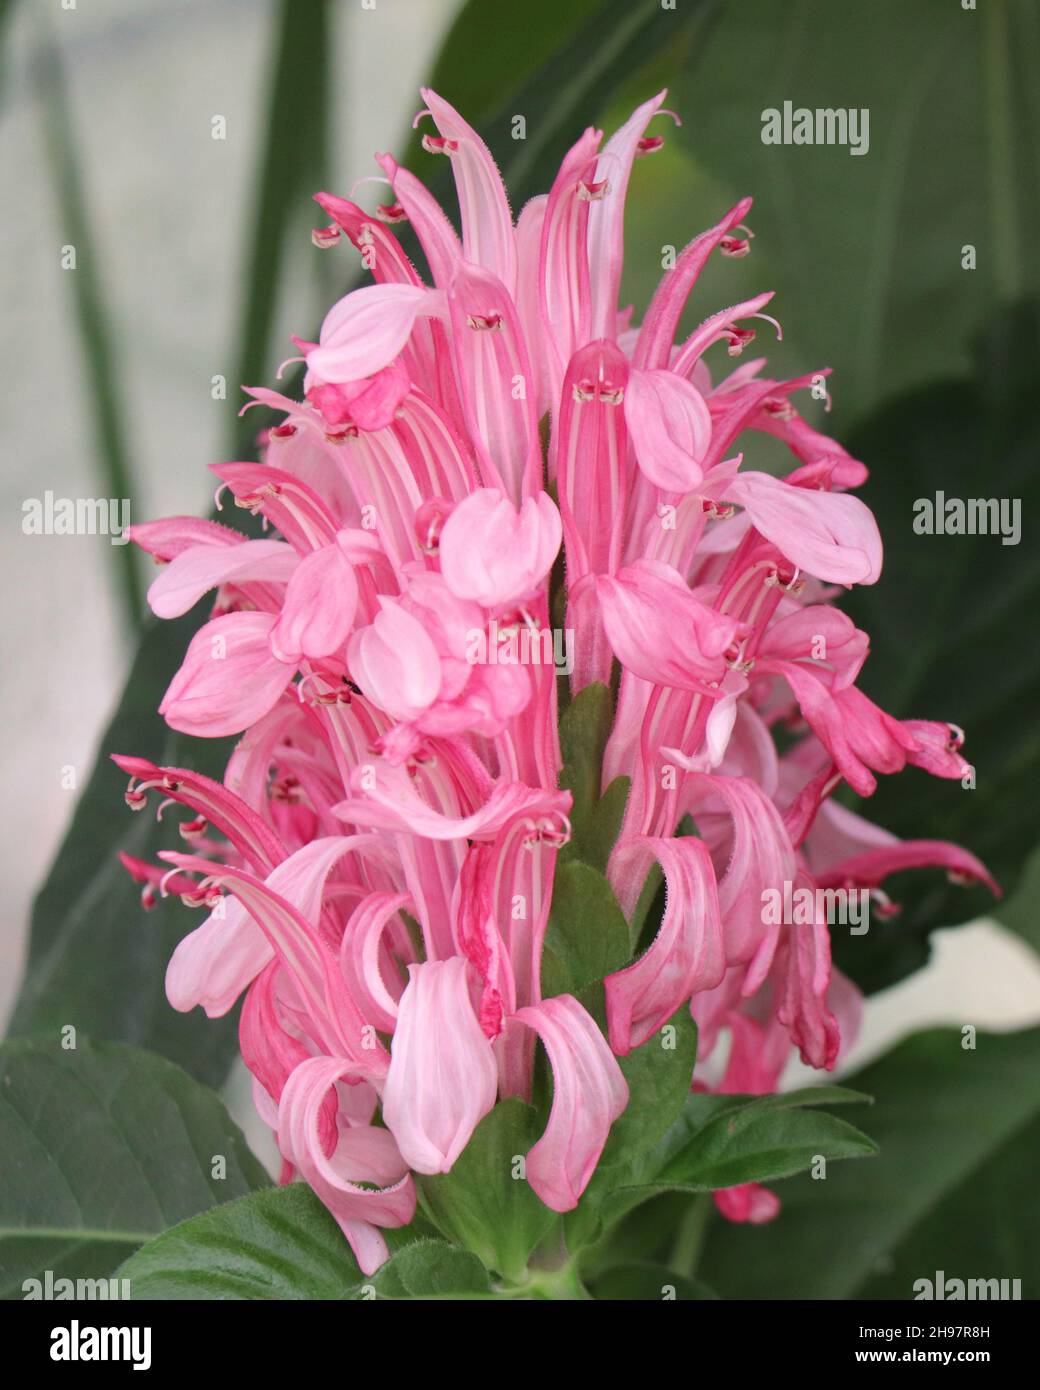 Justicia carnea, the Brazilian plume flower, Brazilian-plume, flamingo flower or jacobinia, is a flowering plant in the family Acanthaceae. Stock Photo